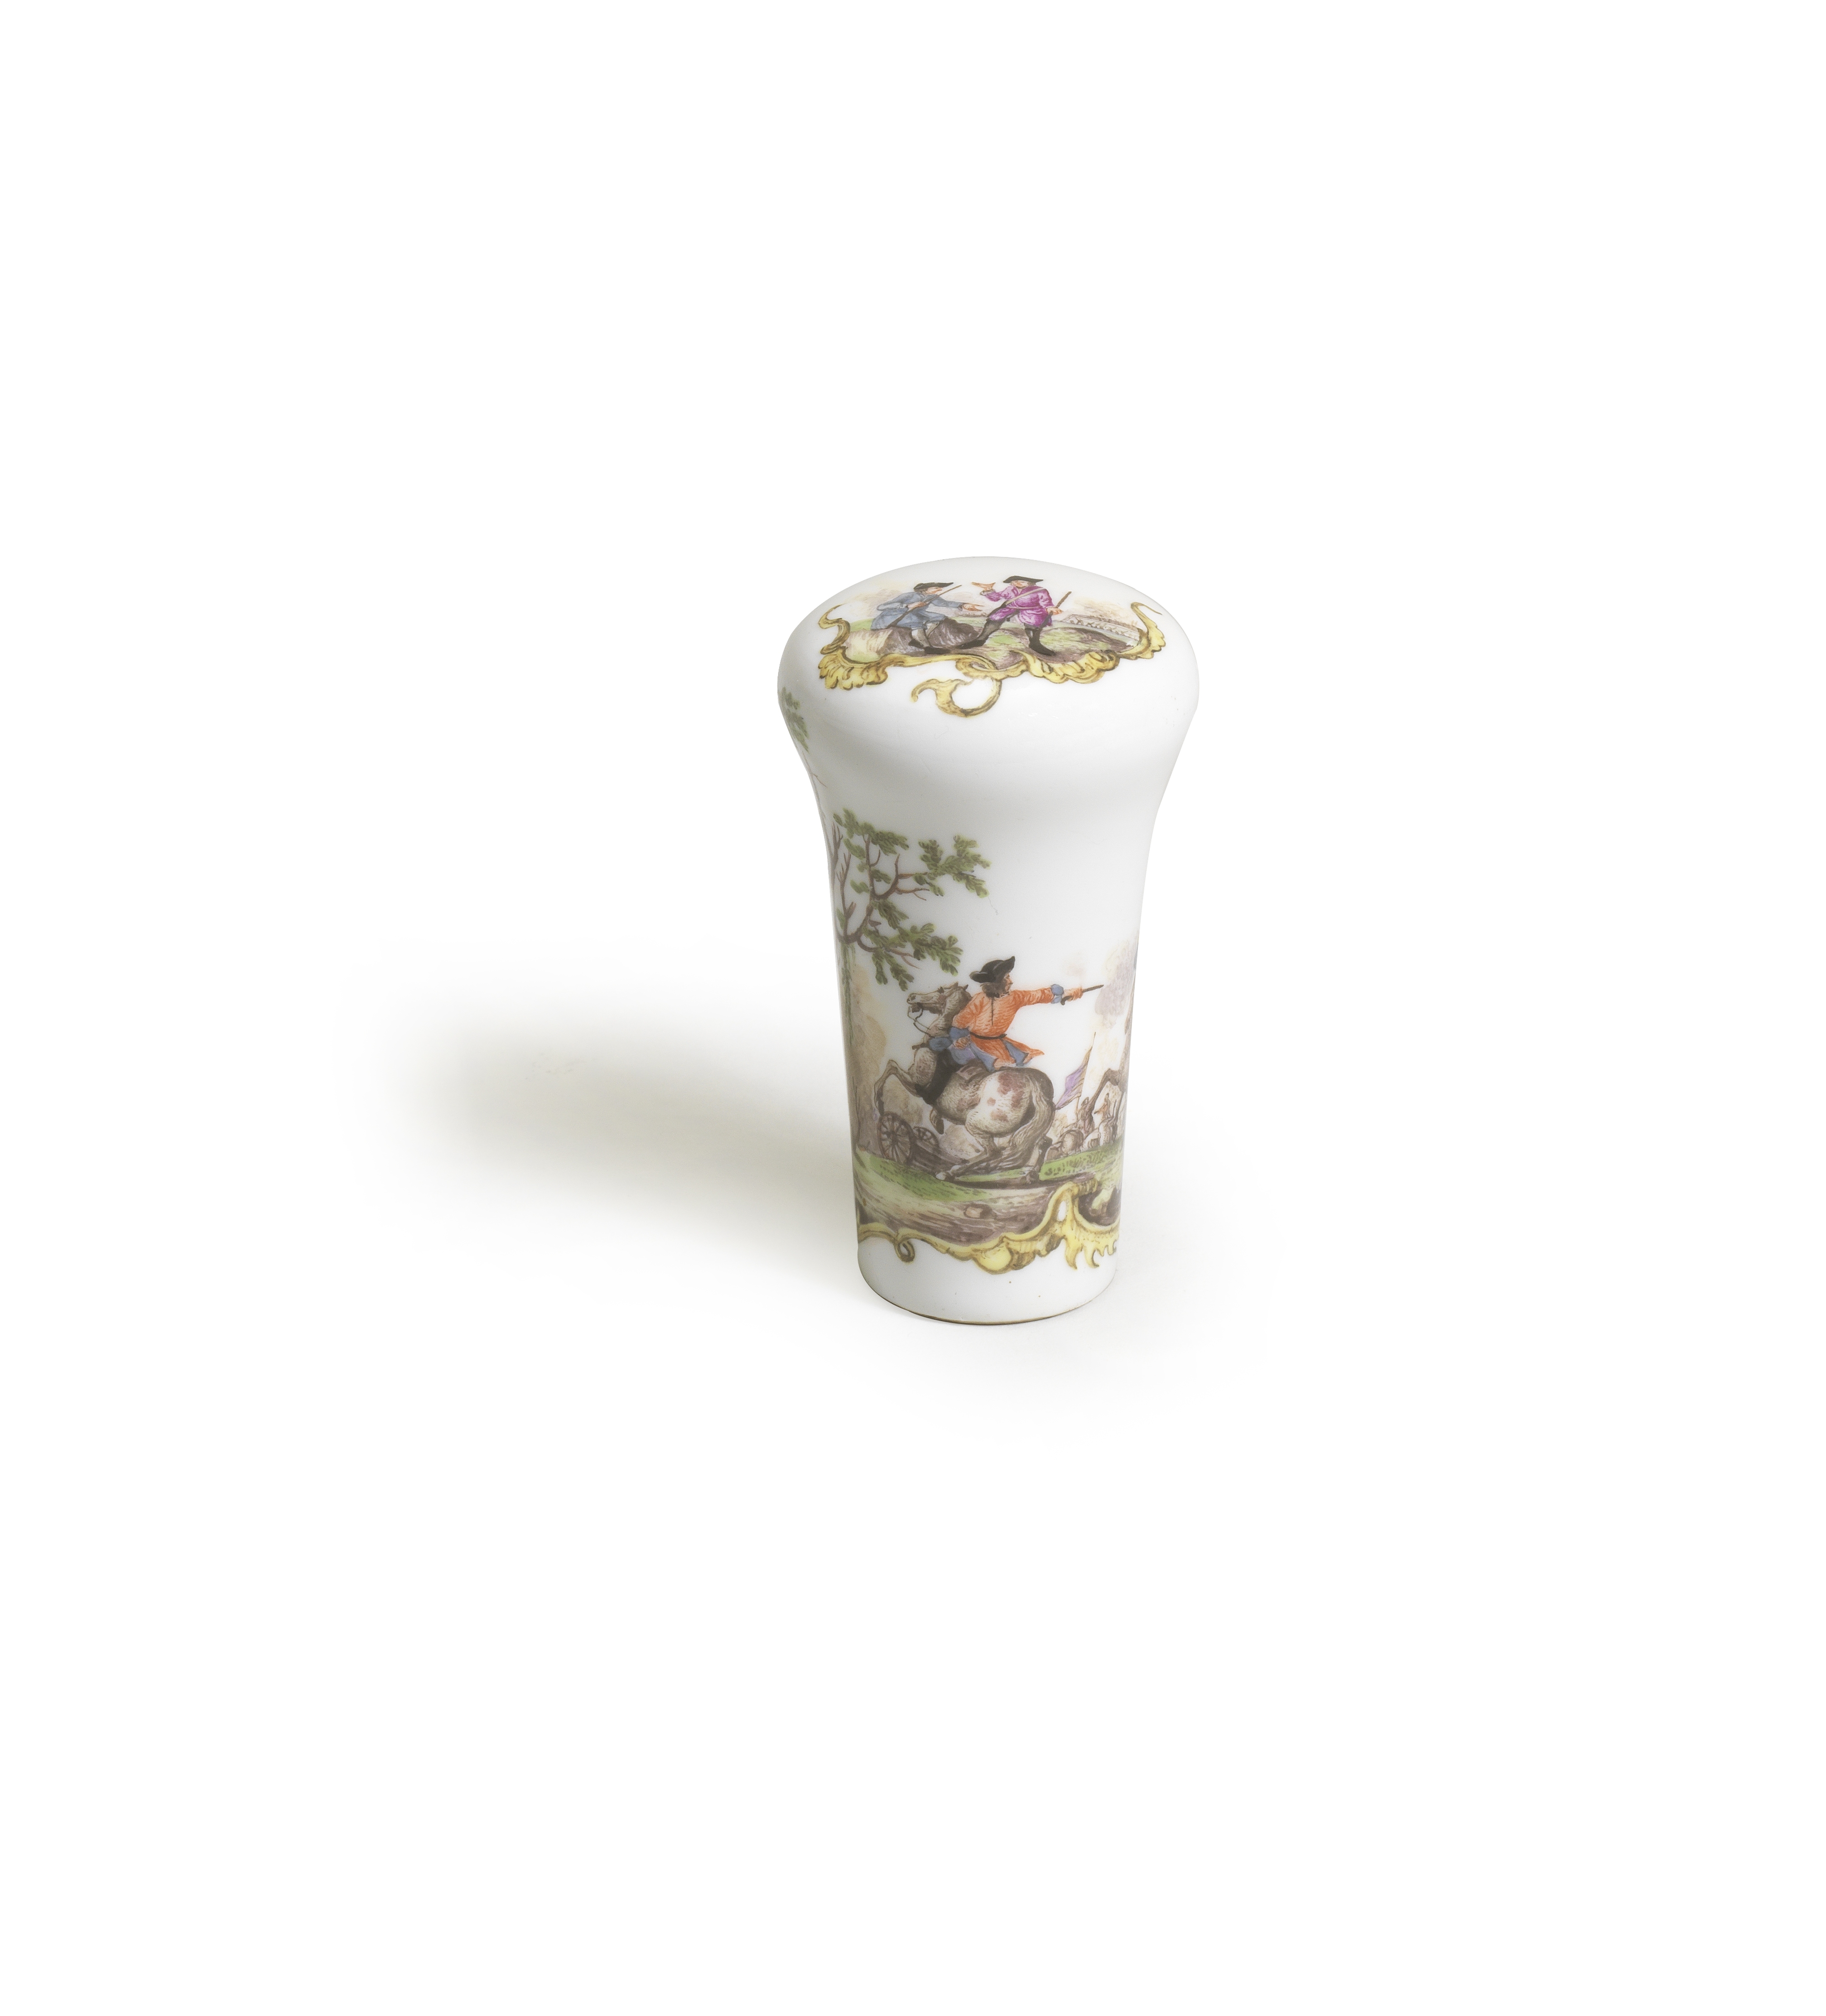 A Meissen cane handle decorated with battle scenes, mid 18th century